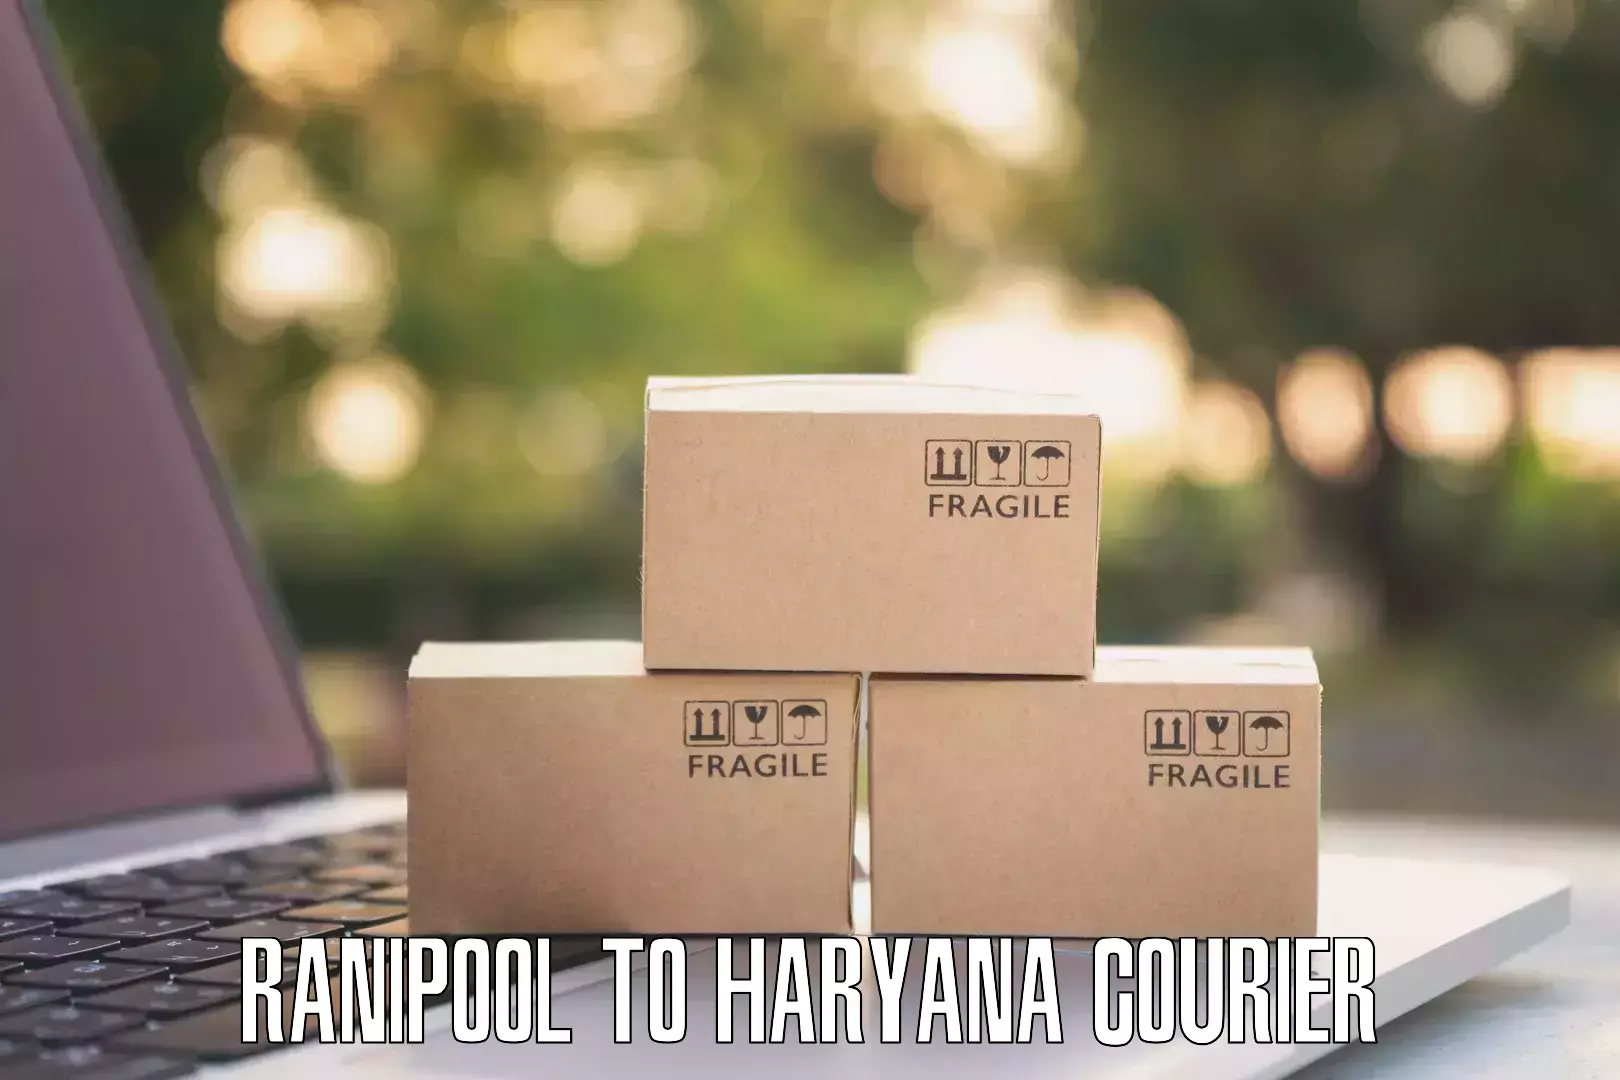 Optimized delivery routes Ranipool to Haryana